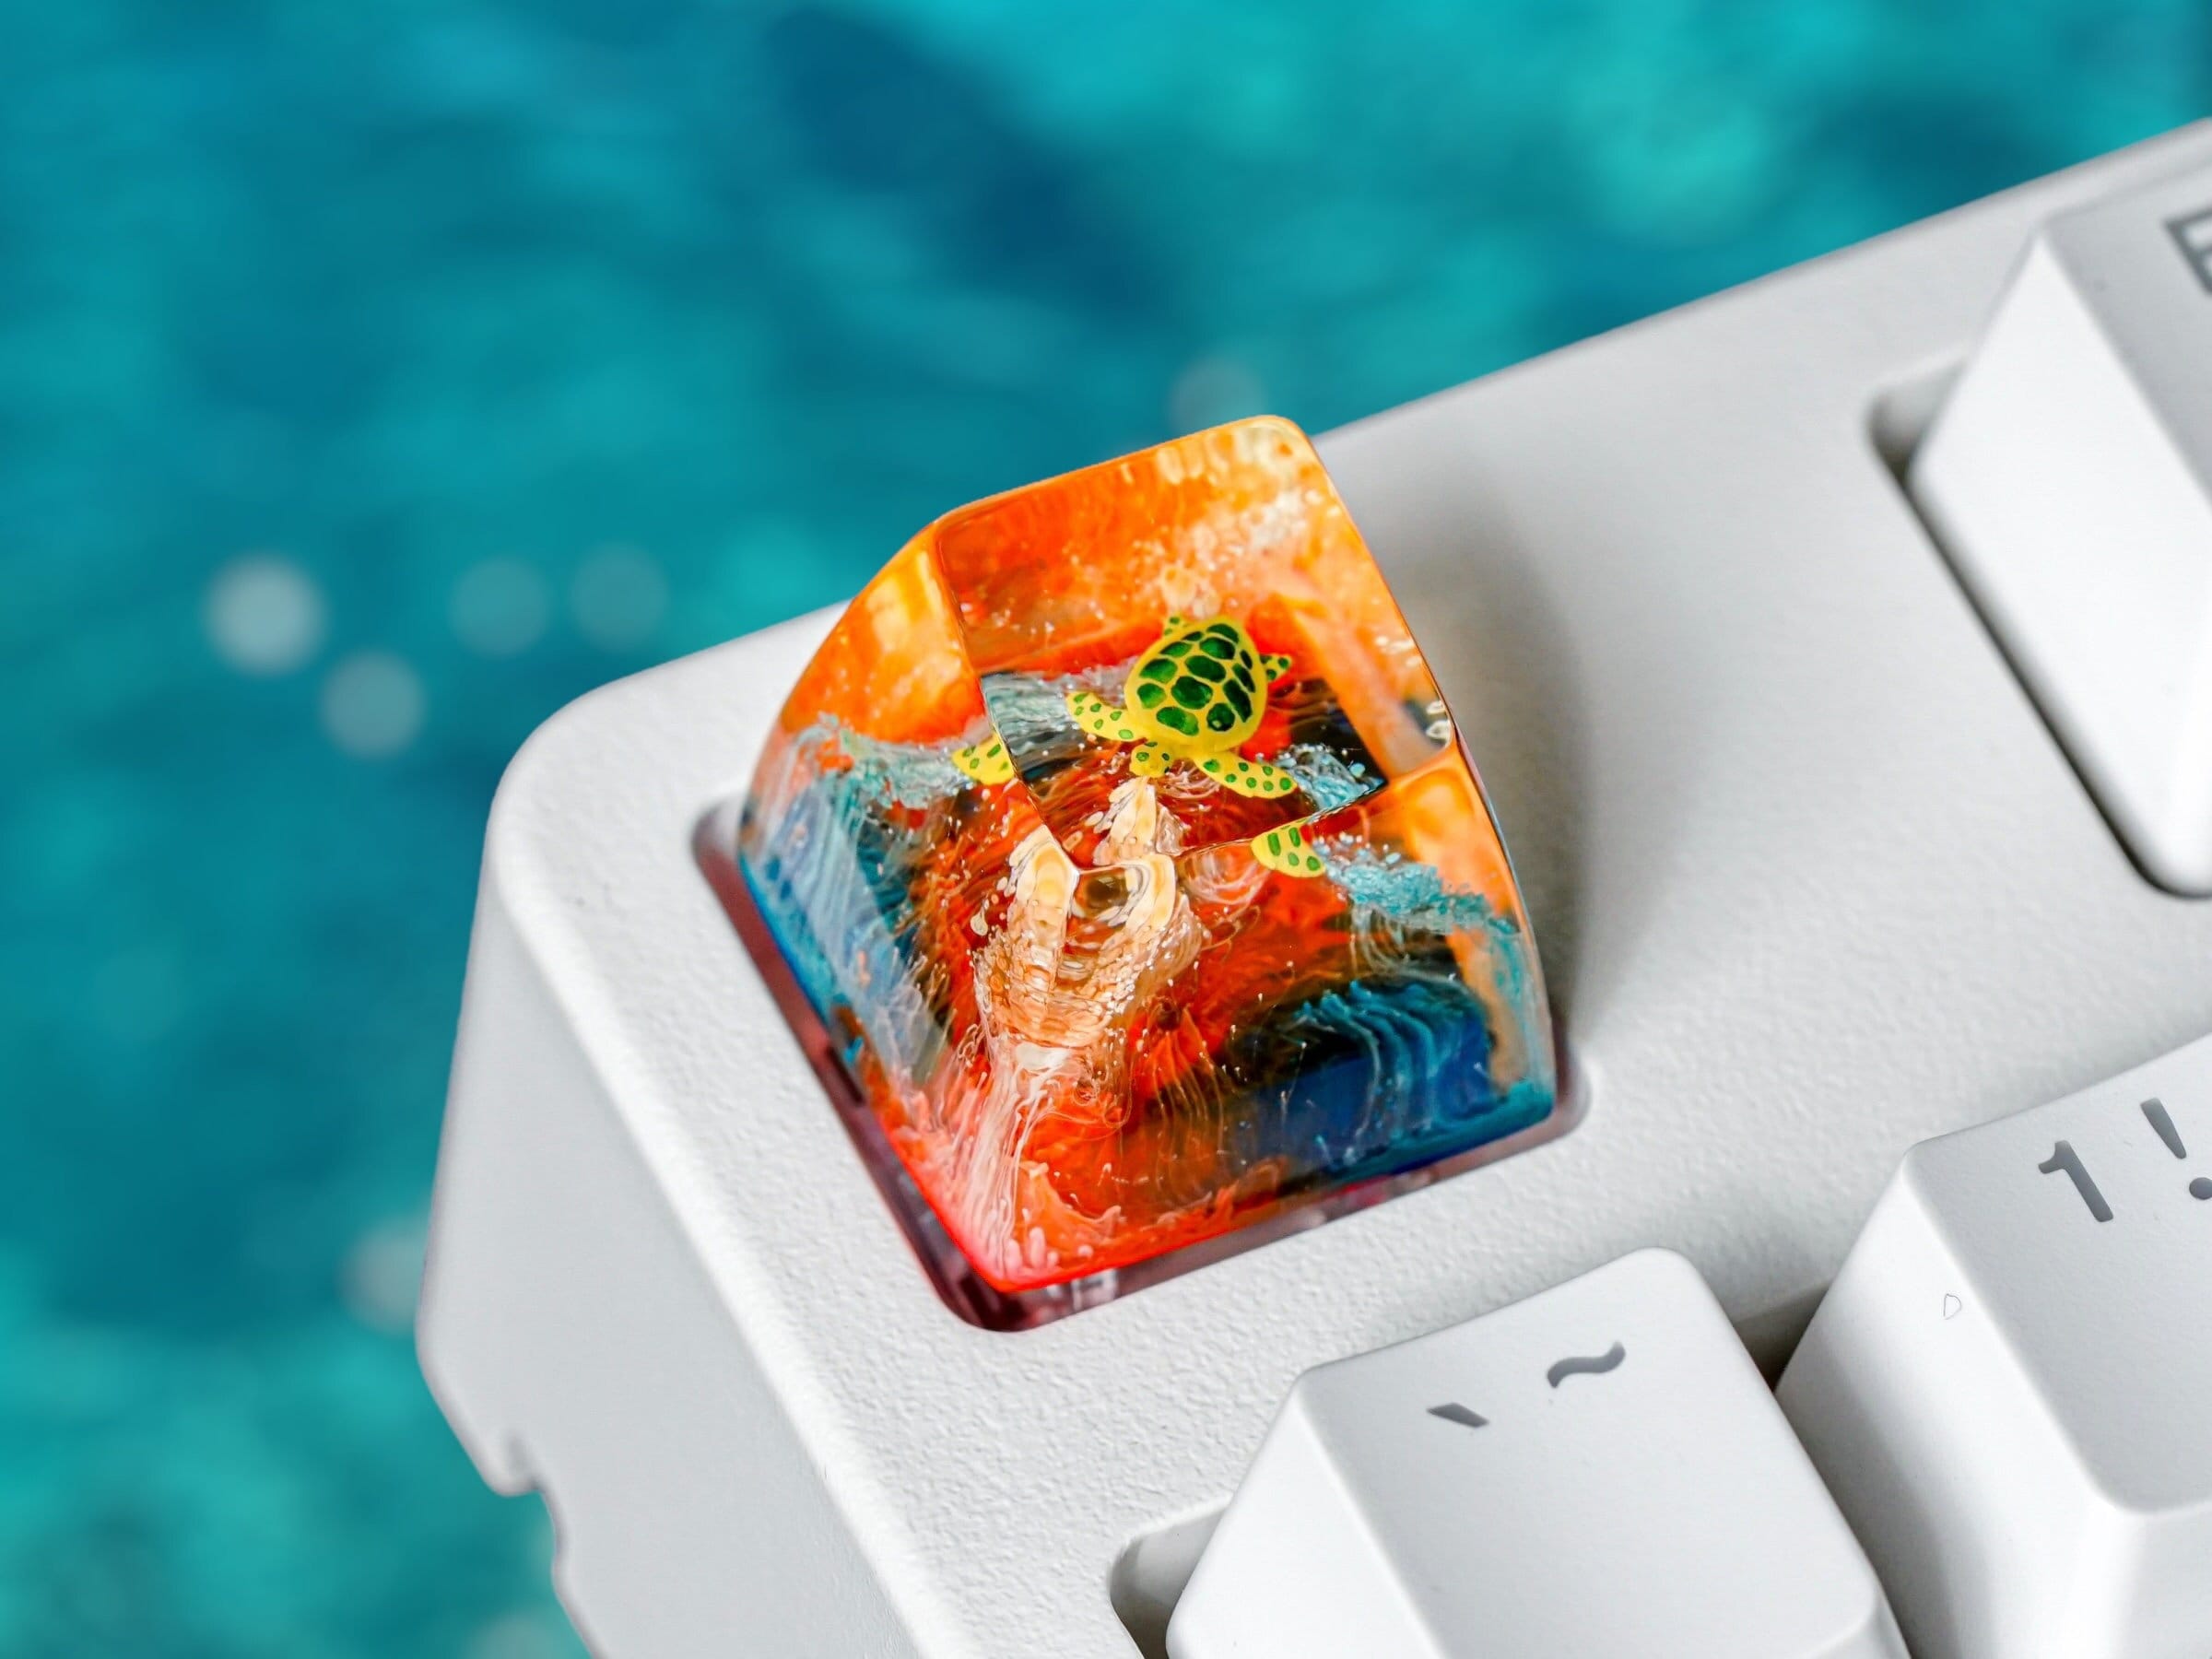 Turtle Keycap, Orange Blue Coral, SA Profile Keycap, Keycap for MX Cherry Switches Mechanical Keyboard, Handmade Gift